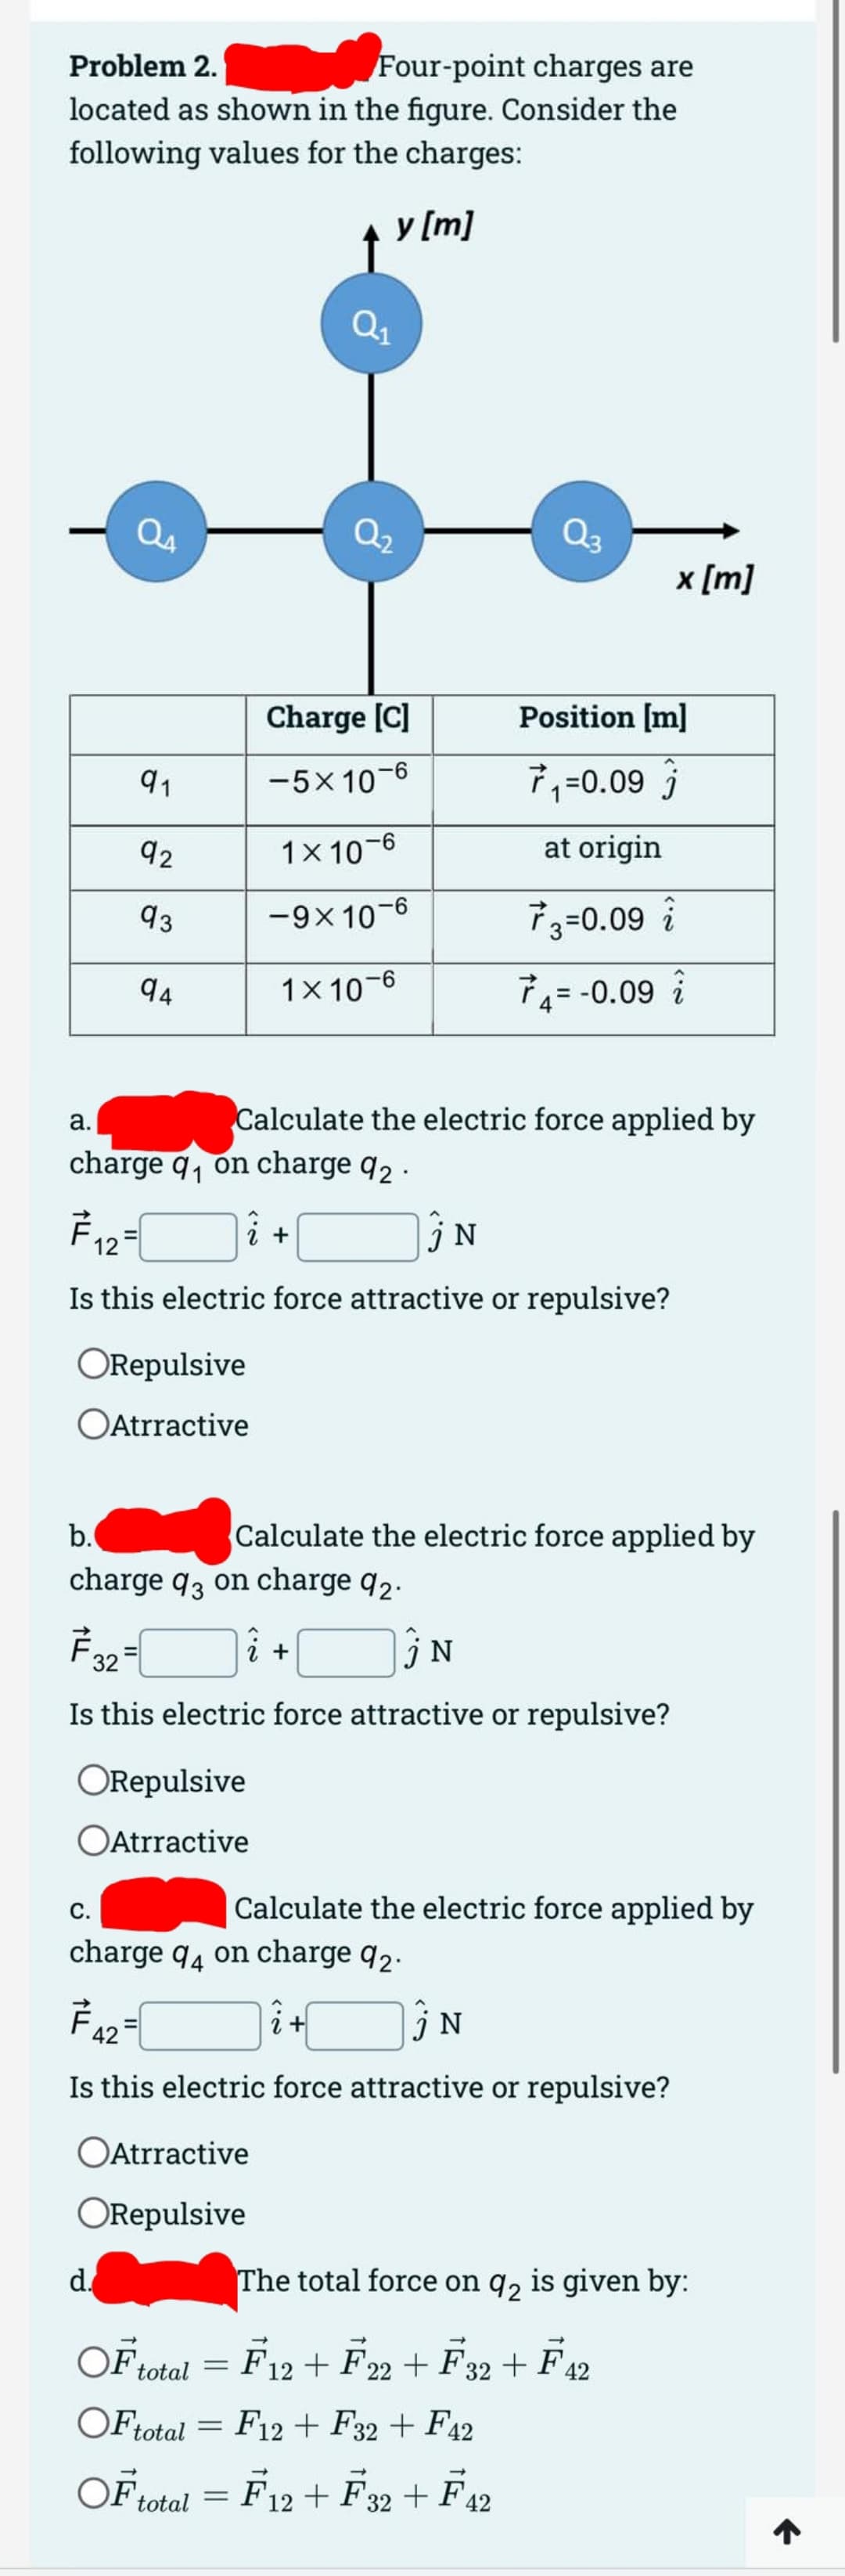 Problem 2.
Four-point charges are
located as shown in the figure. Consider the
following values for the charges:
a.
91
92
93
94
F12
C.
ORepulsive
OAtrractive
charge q₁ on charge 92.
d.
2 +
↑
ORepulsive
Atrractive
y [m]
Charge [C]
−5×10-6
Q₁
1x 10-6
-9x 10-6
1x 10-6
=
Calculate the electric force applied by
Is this electric force attractive or repulsive?
i +
Atrractive
ORepulsive
N
b.
charge q3 on charge 92.
F32=
N
Is this electric force attractive or repulsive?
Position [m]
7₁=0.09
at origin
73=0.09 i
74= -0.09
Calculate the electric force applied by
x [m]
charge 94 on charge 92.
742=
i+
jN
Is this electric force attractive or repulsive?
Calculate the electric force applied by
OF total =
OF total
OF total = F12+ F32 + F42
The total force on q2 is given by:
F12 + F22 + F32 + F42
F12 F32 + F42